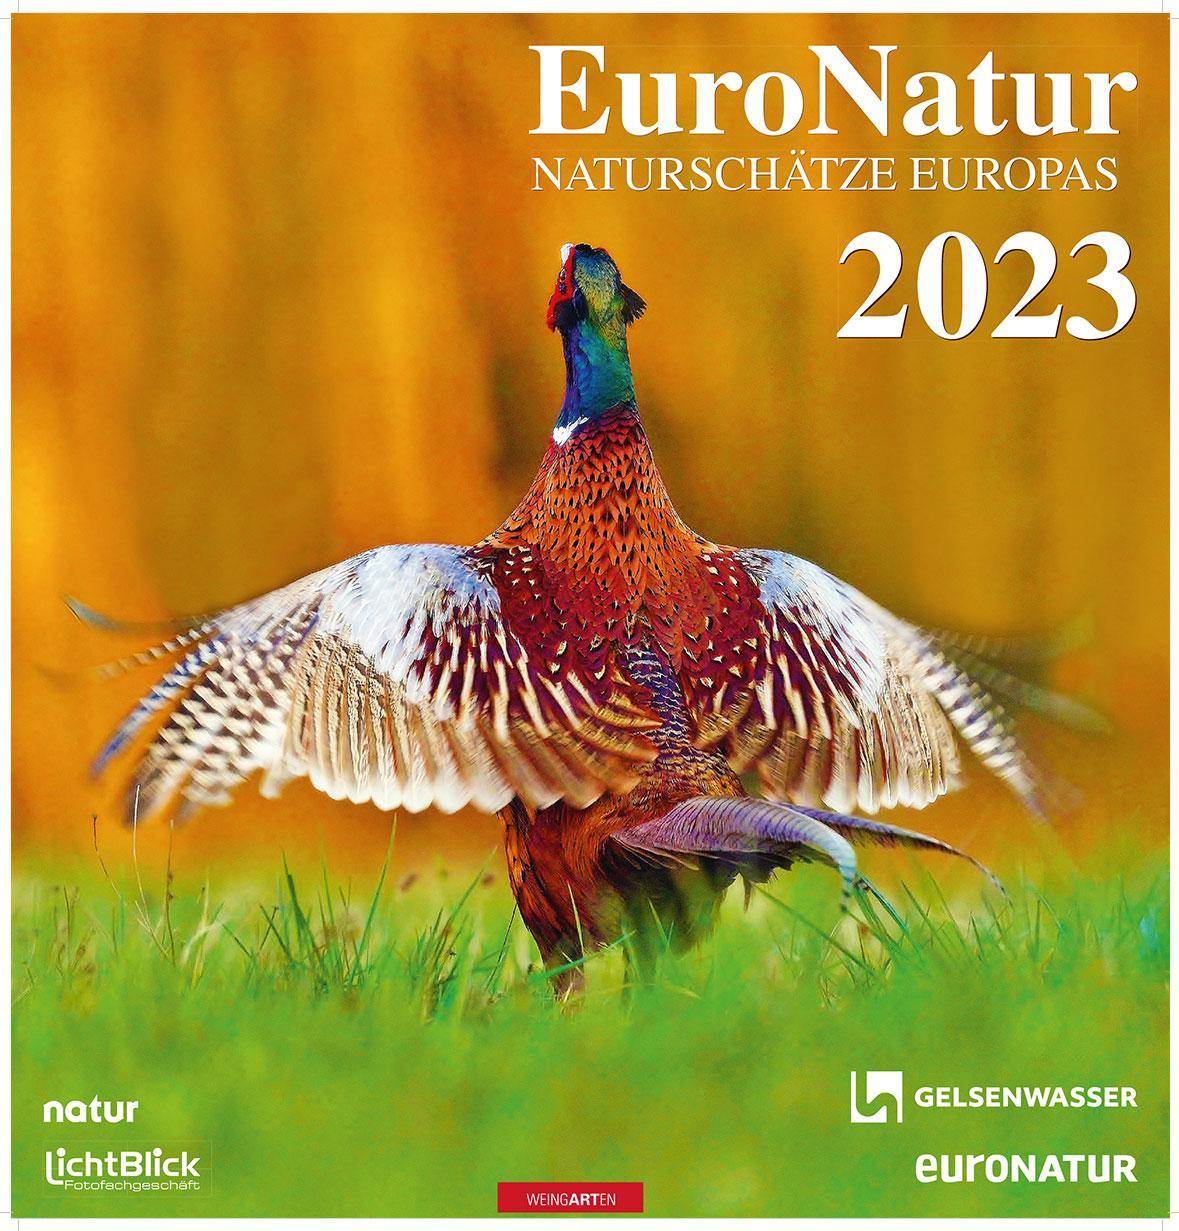 Common pheasant on the cover of the calendar